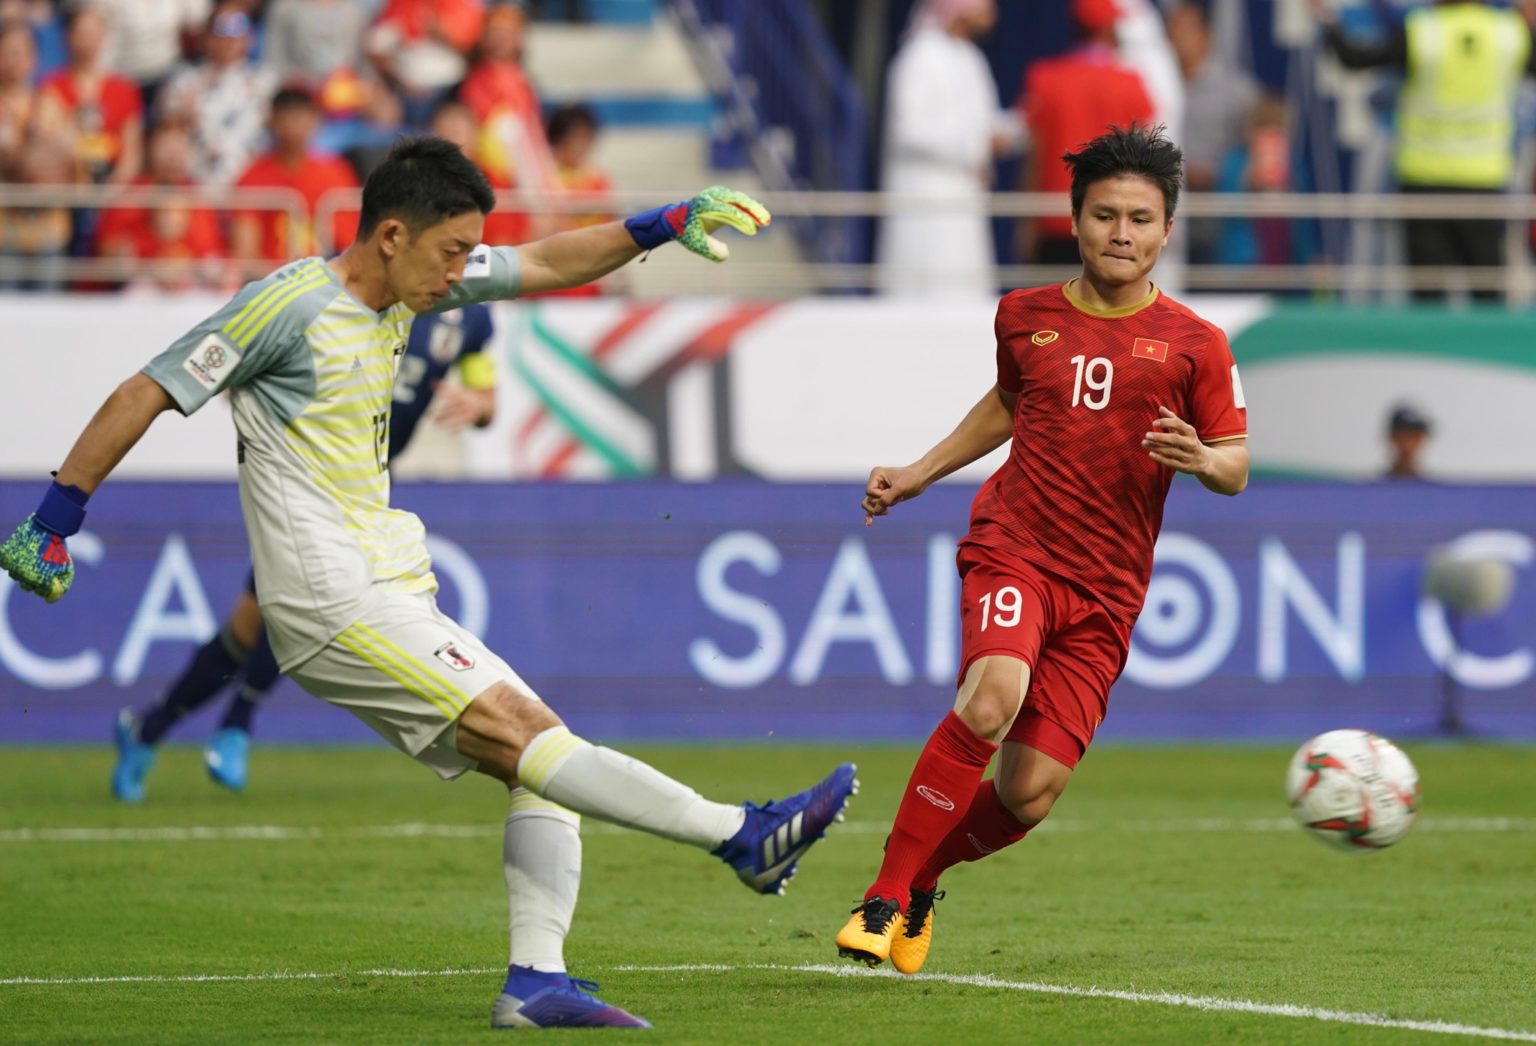 7 Quang Hai Facts About The Best AFC Cup Midfielder Who's A CR7 Fan